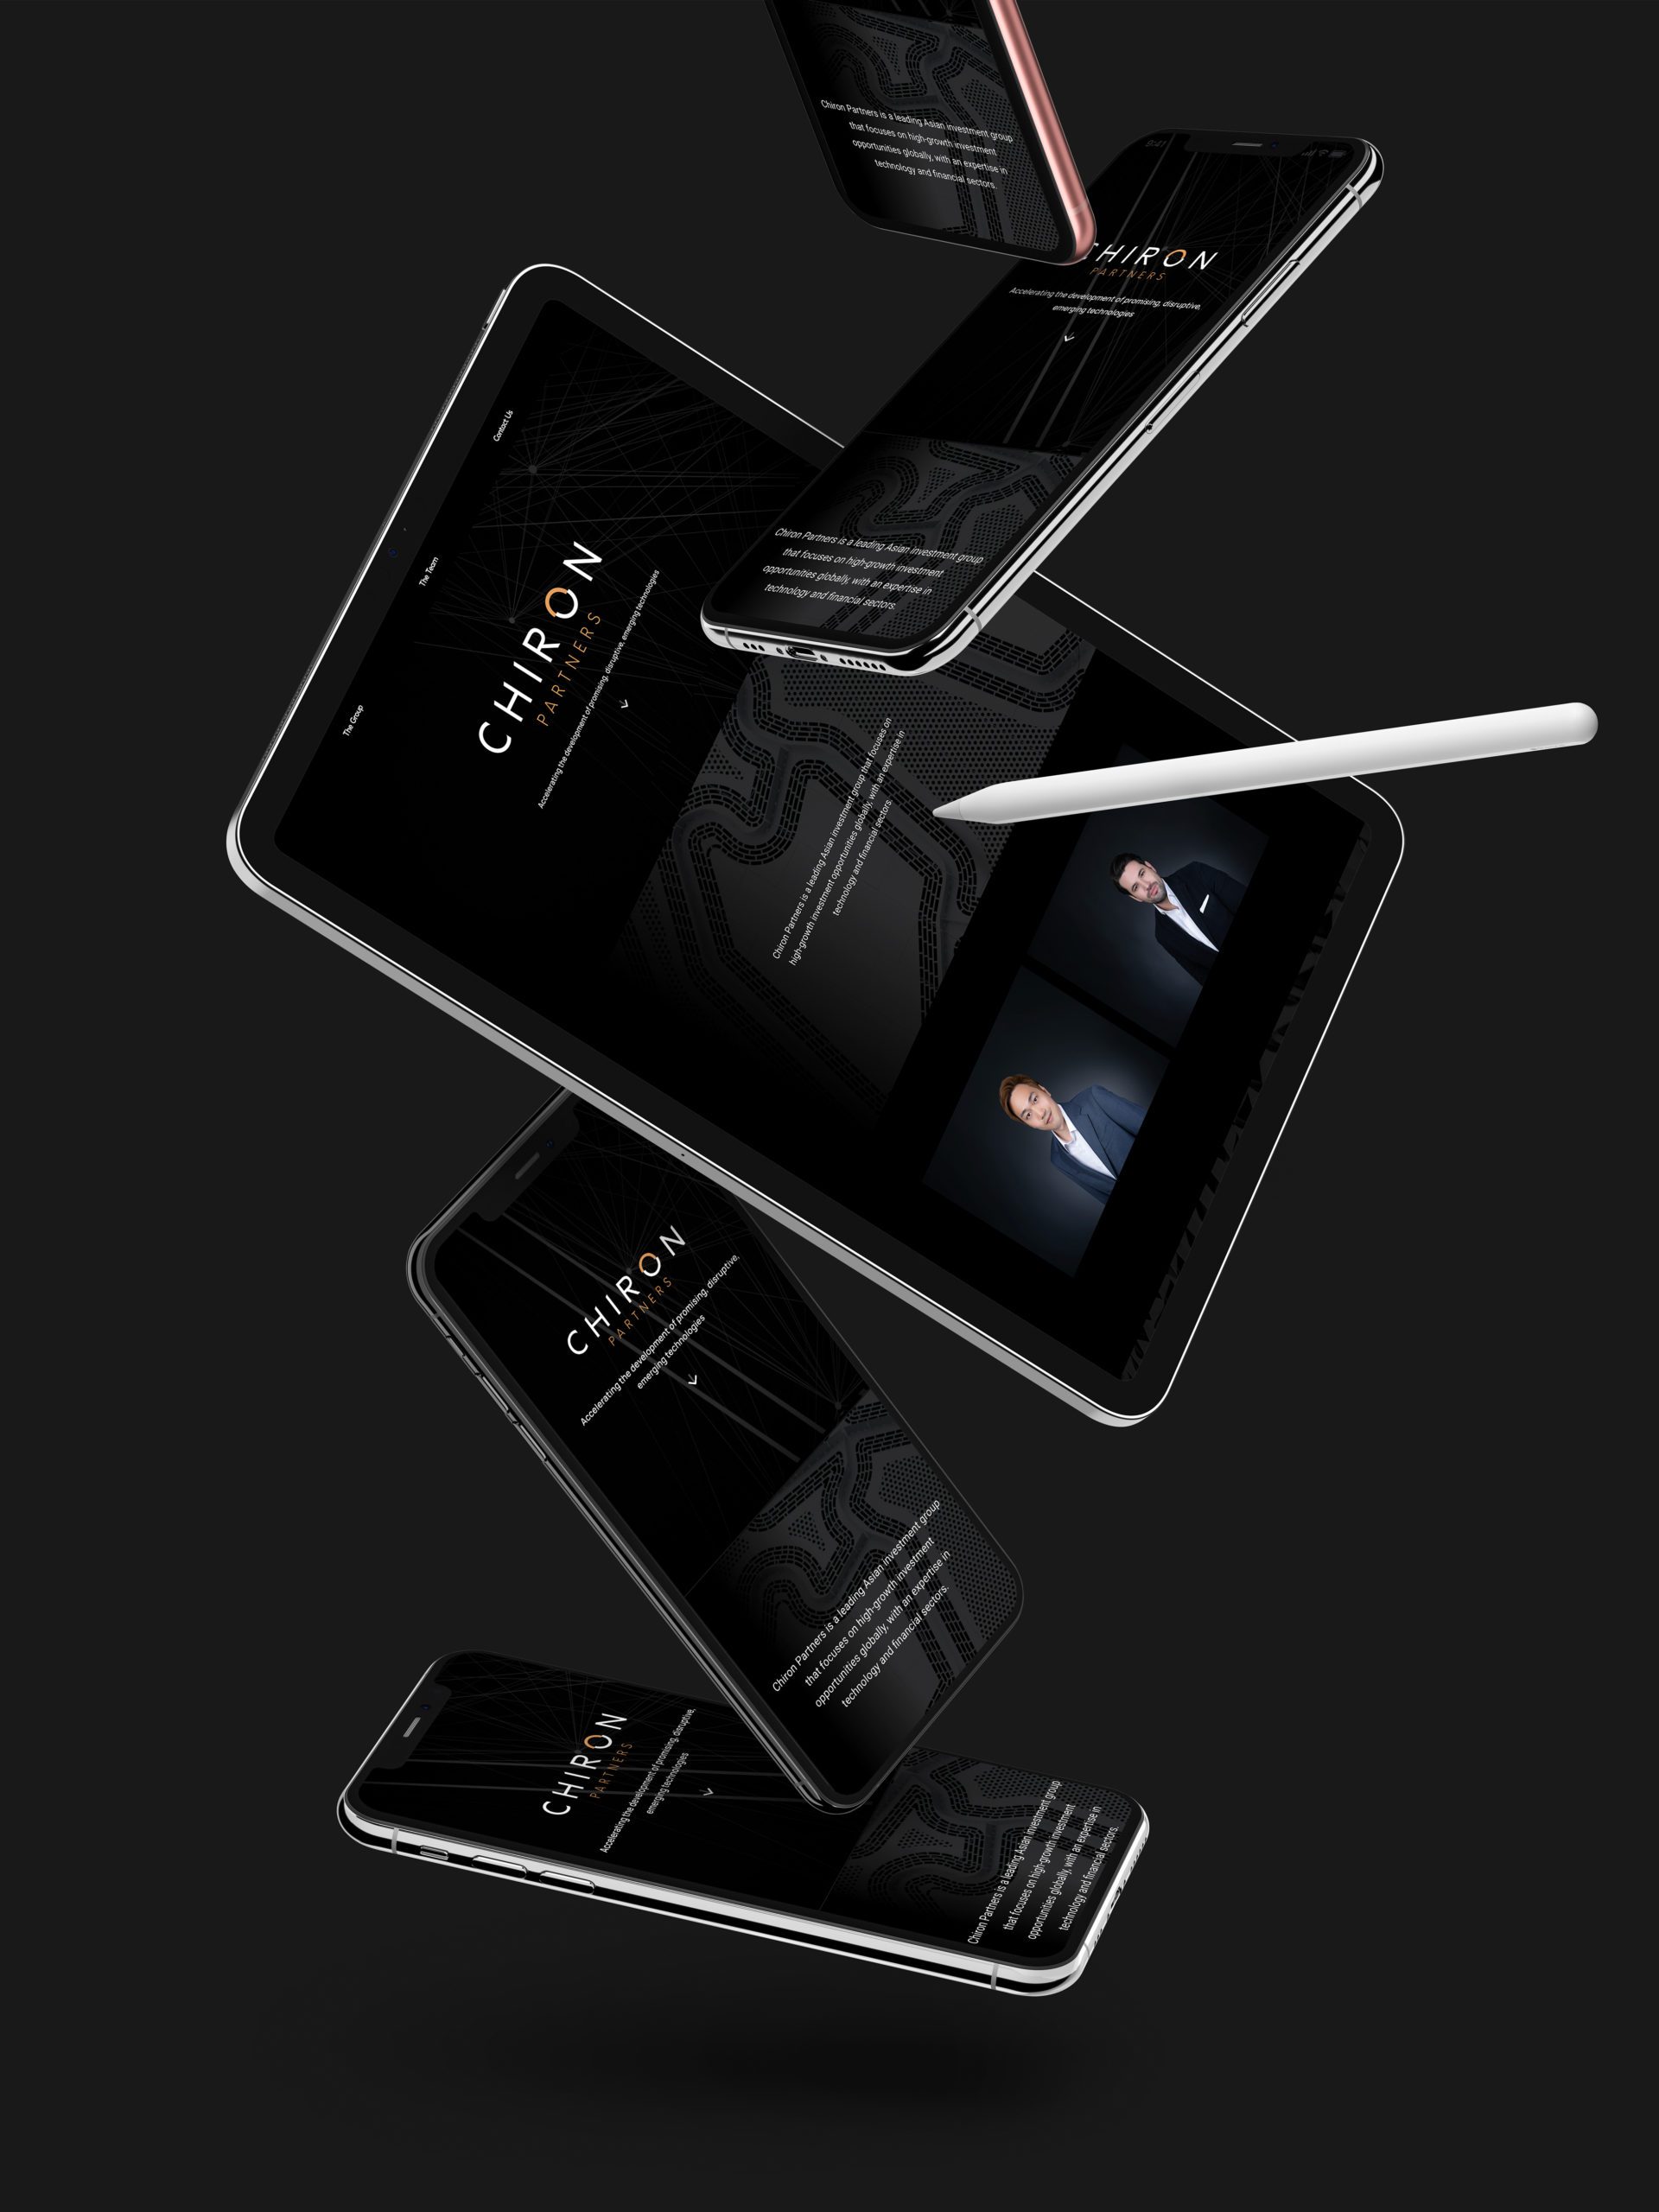 Chiron Partners website shown on varios responsive devices with dark background